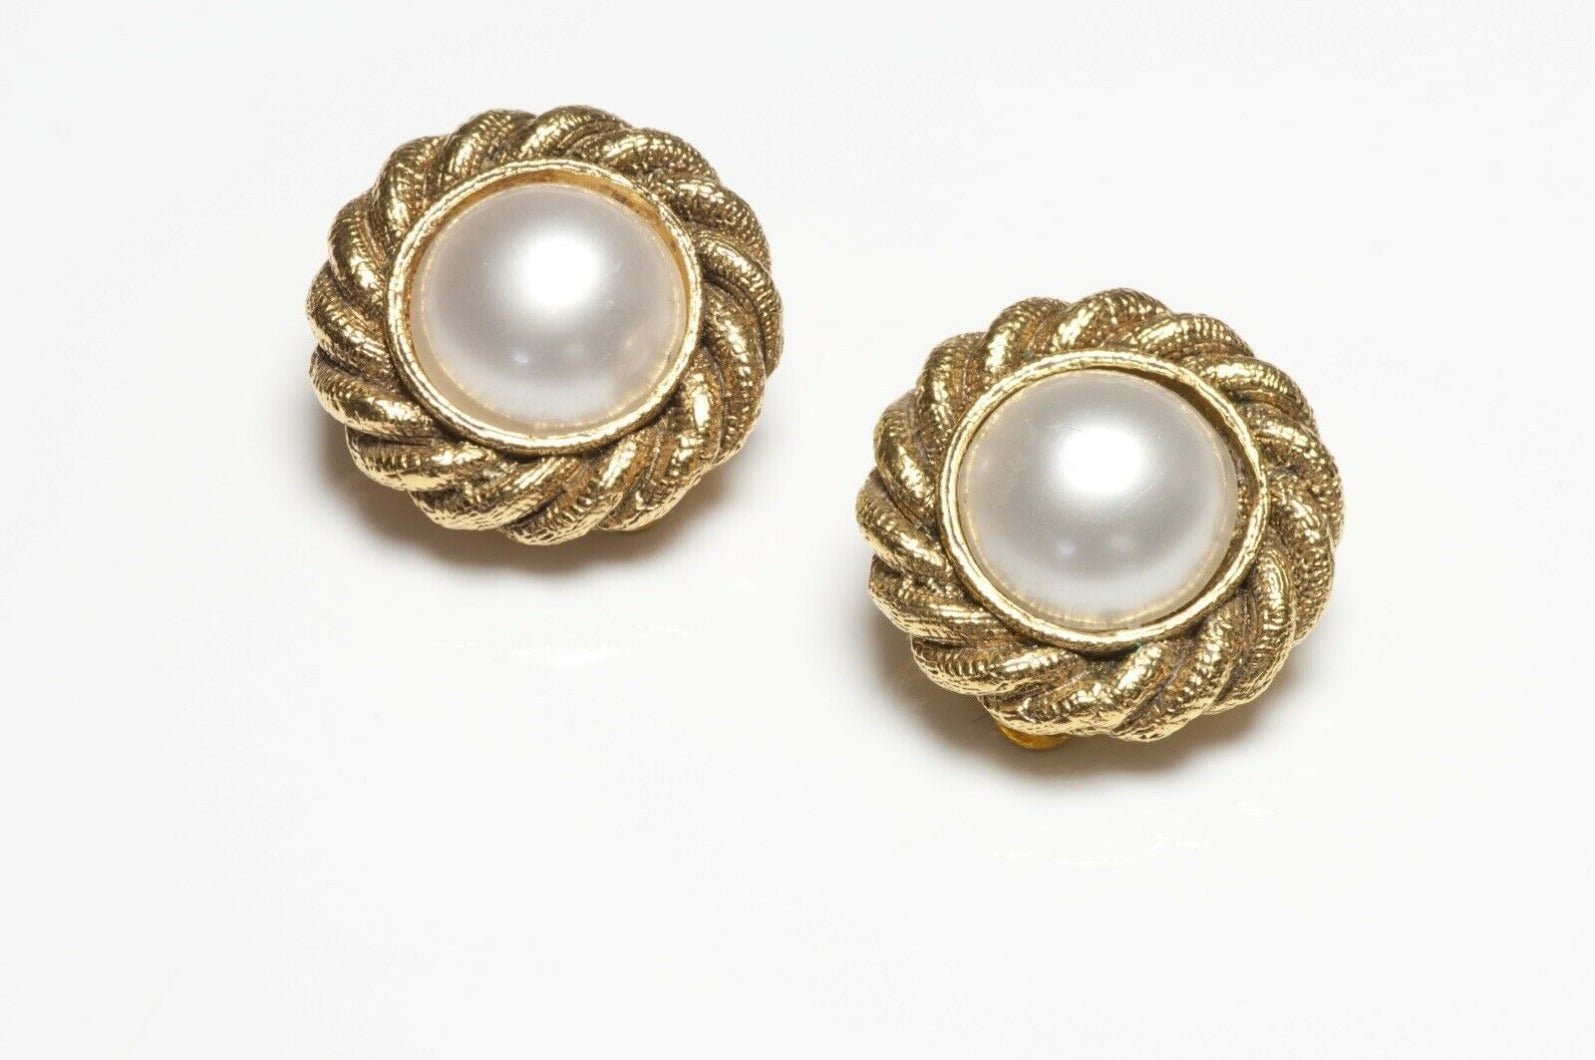 Vintage CHANEL Paris Gold Plated Faux Pearl Camellia Flower Earrings